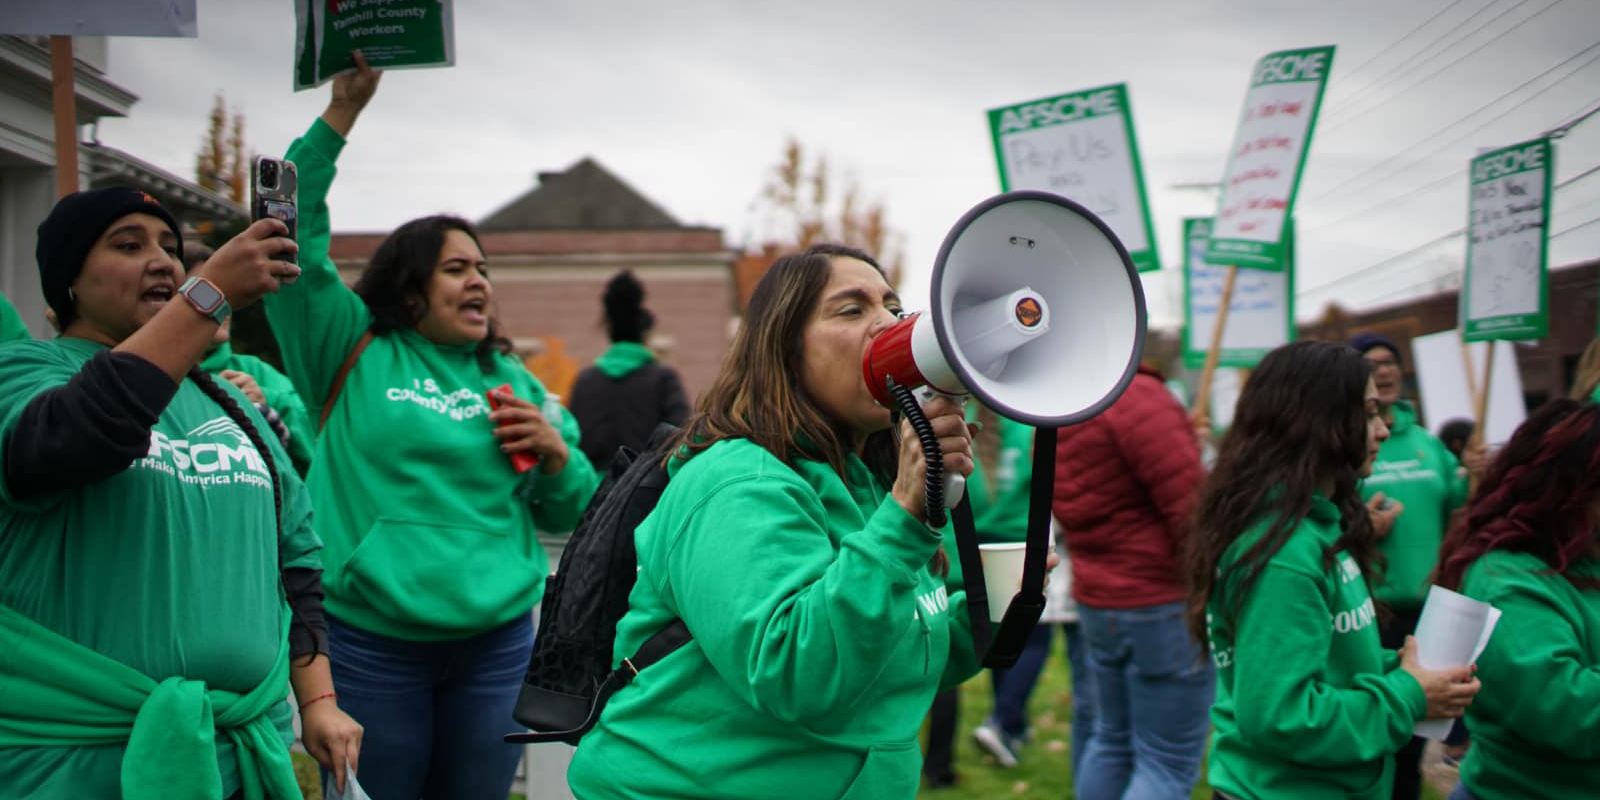 Strike in Oregon forces employer to offer fair contract